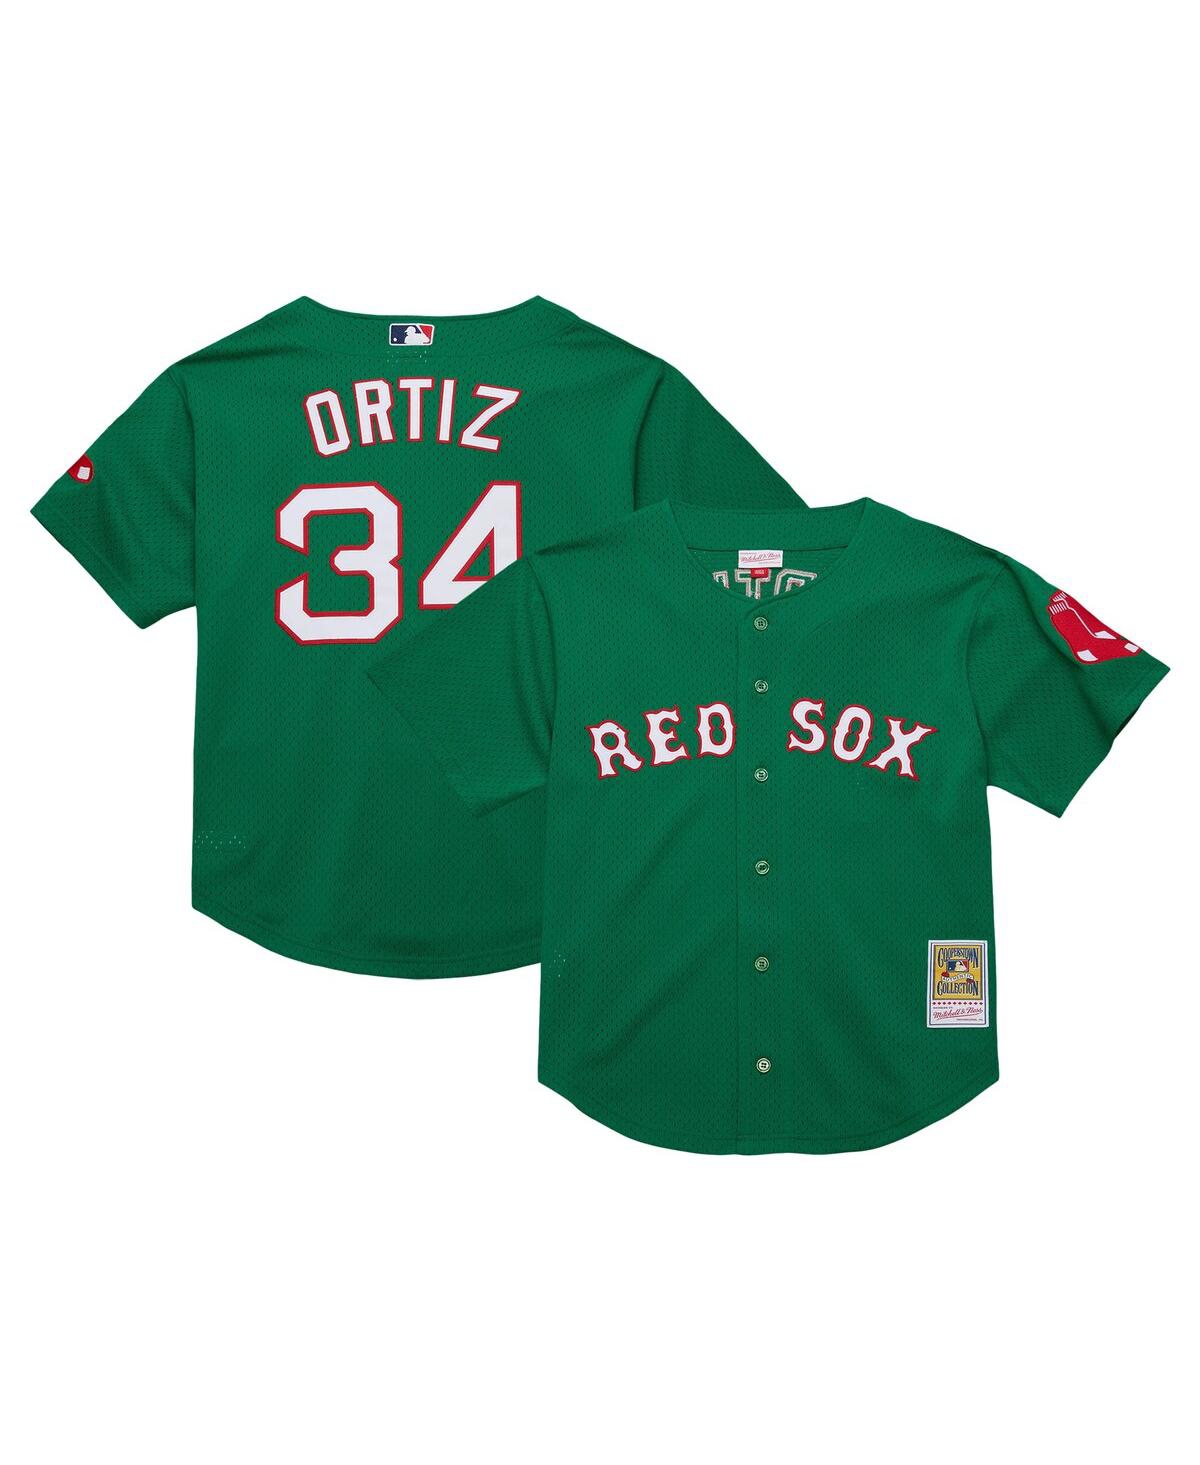 Men's Mitchell & Ness David Ortiz Kelly Green Boston Red Sox Cooperstown Collection Mesh Batting Practice Jersey - Kelly Green